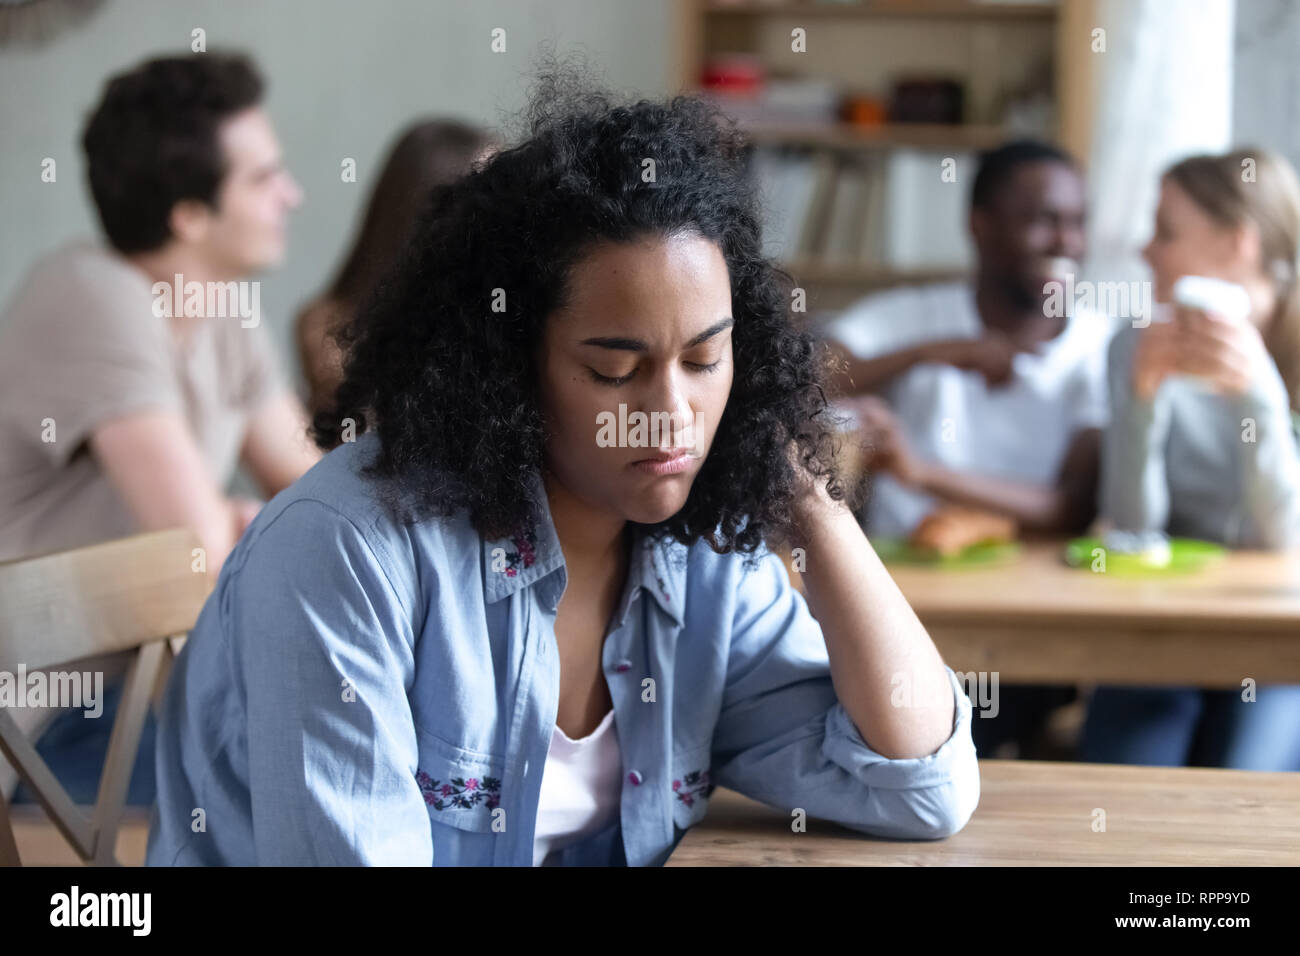 Upset mixed race woman offended by friends, feeling unhappy Stock Photo